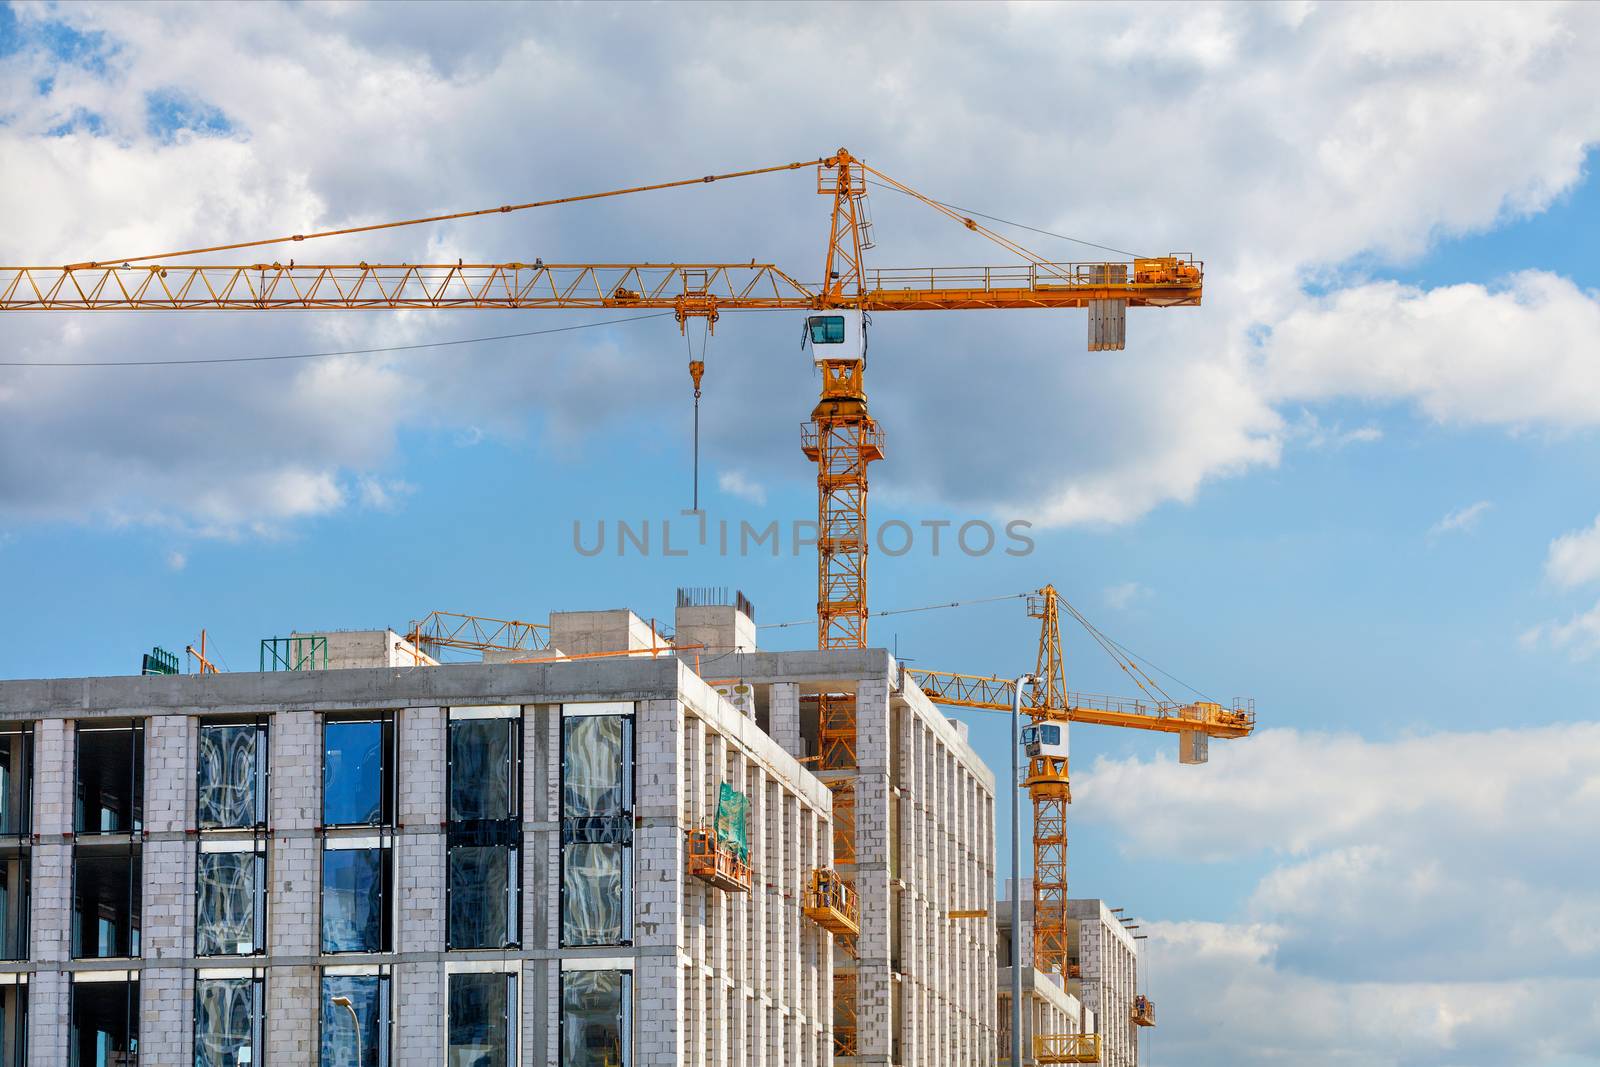 Tower cranes work on the construction site of a modern multi-storey residential building against a blue slightly cloudy sky, copy space.